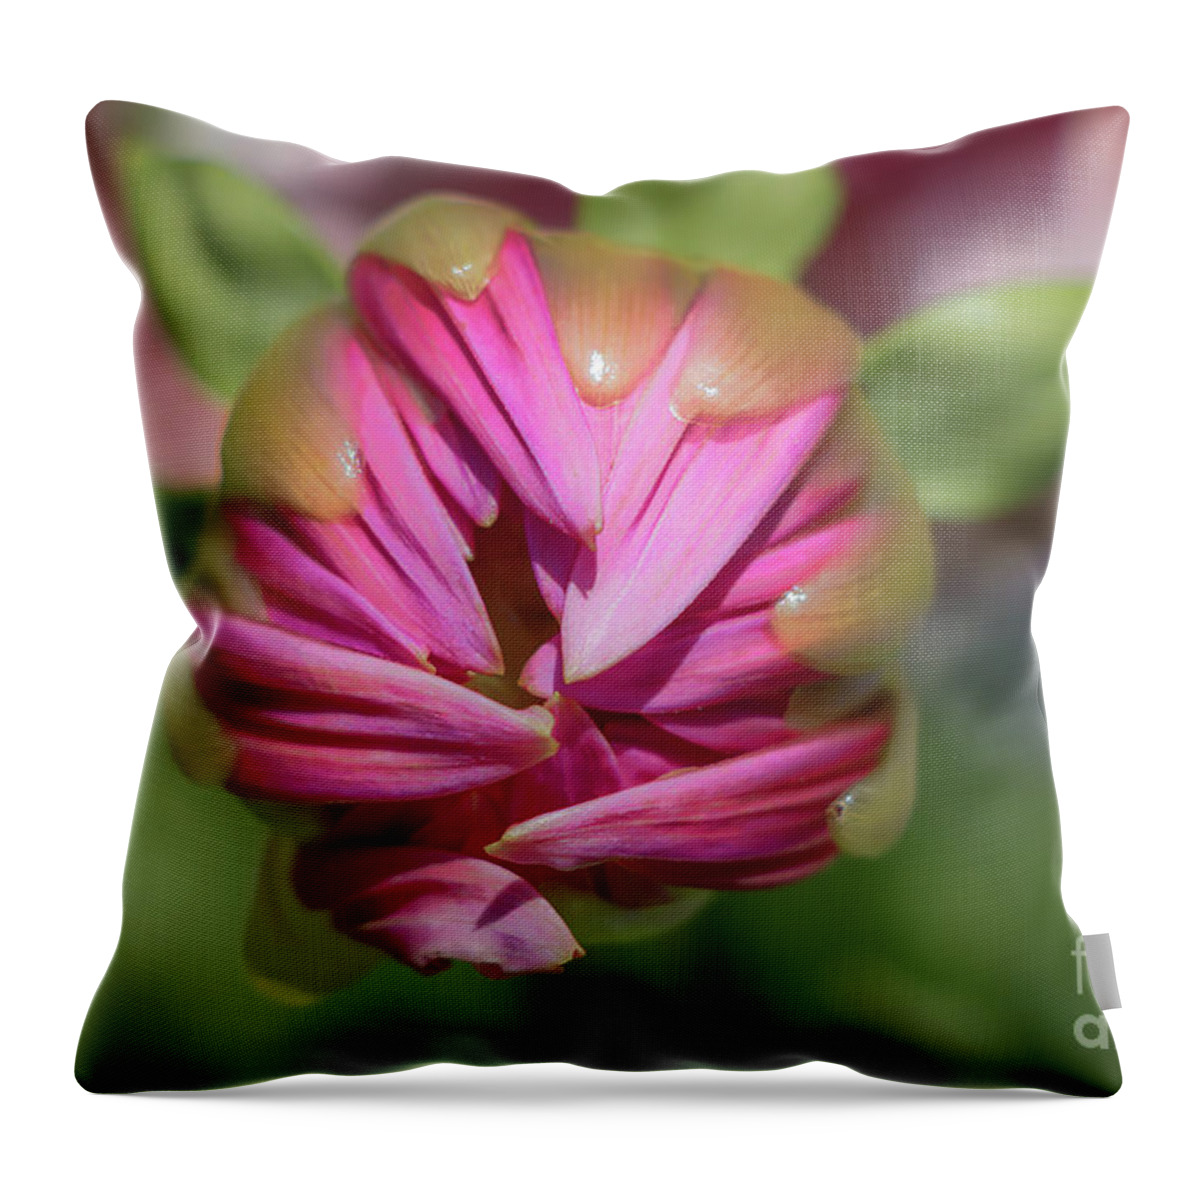 Cannot Rush Perfection Throw Pillow featuring the photograph Cannot Rush Perfection by Elizabeth Dow